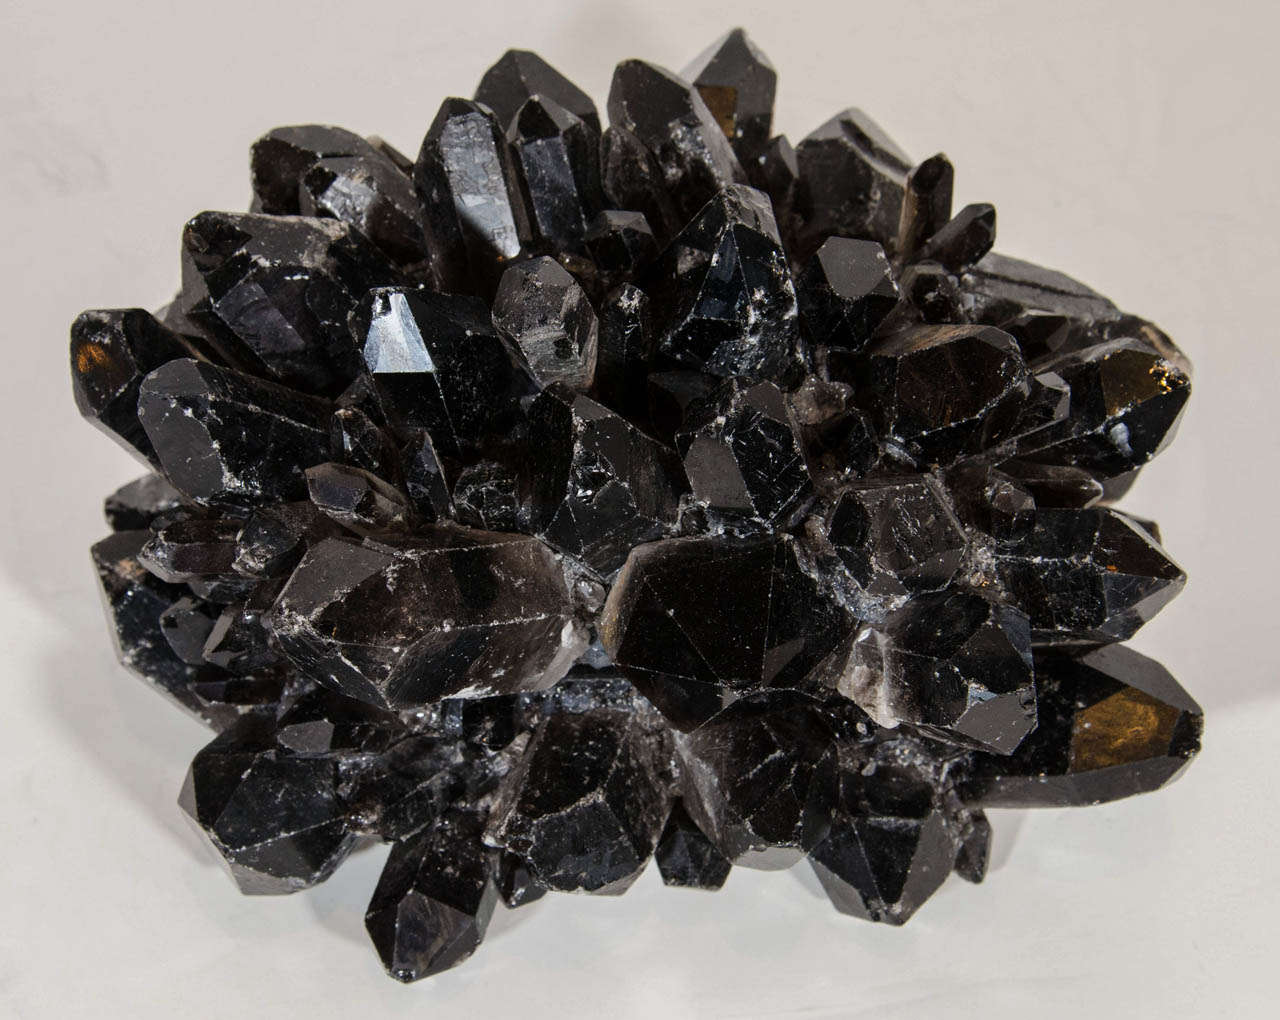 Stunning decorative object comprised of natural and rare black quartz crystals. The top half of these extraordinary large chunks of crystals can be lifted to reveal an interior center box or compartment, lined in a rich black felt fabric. The bottom